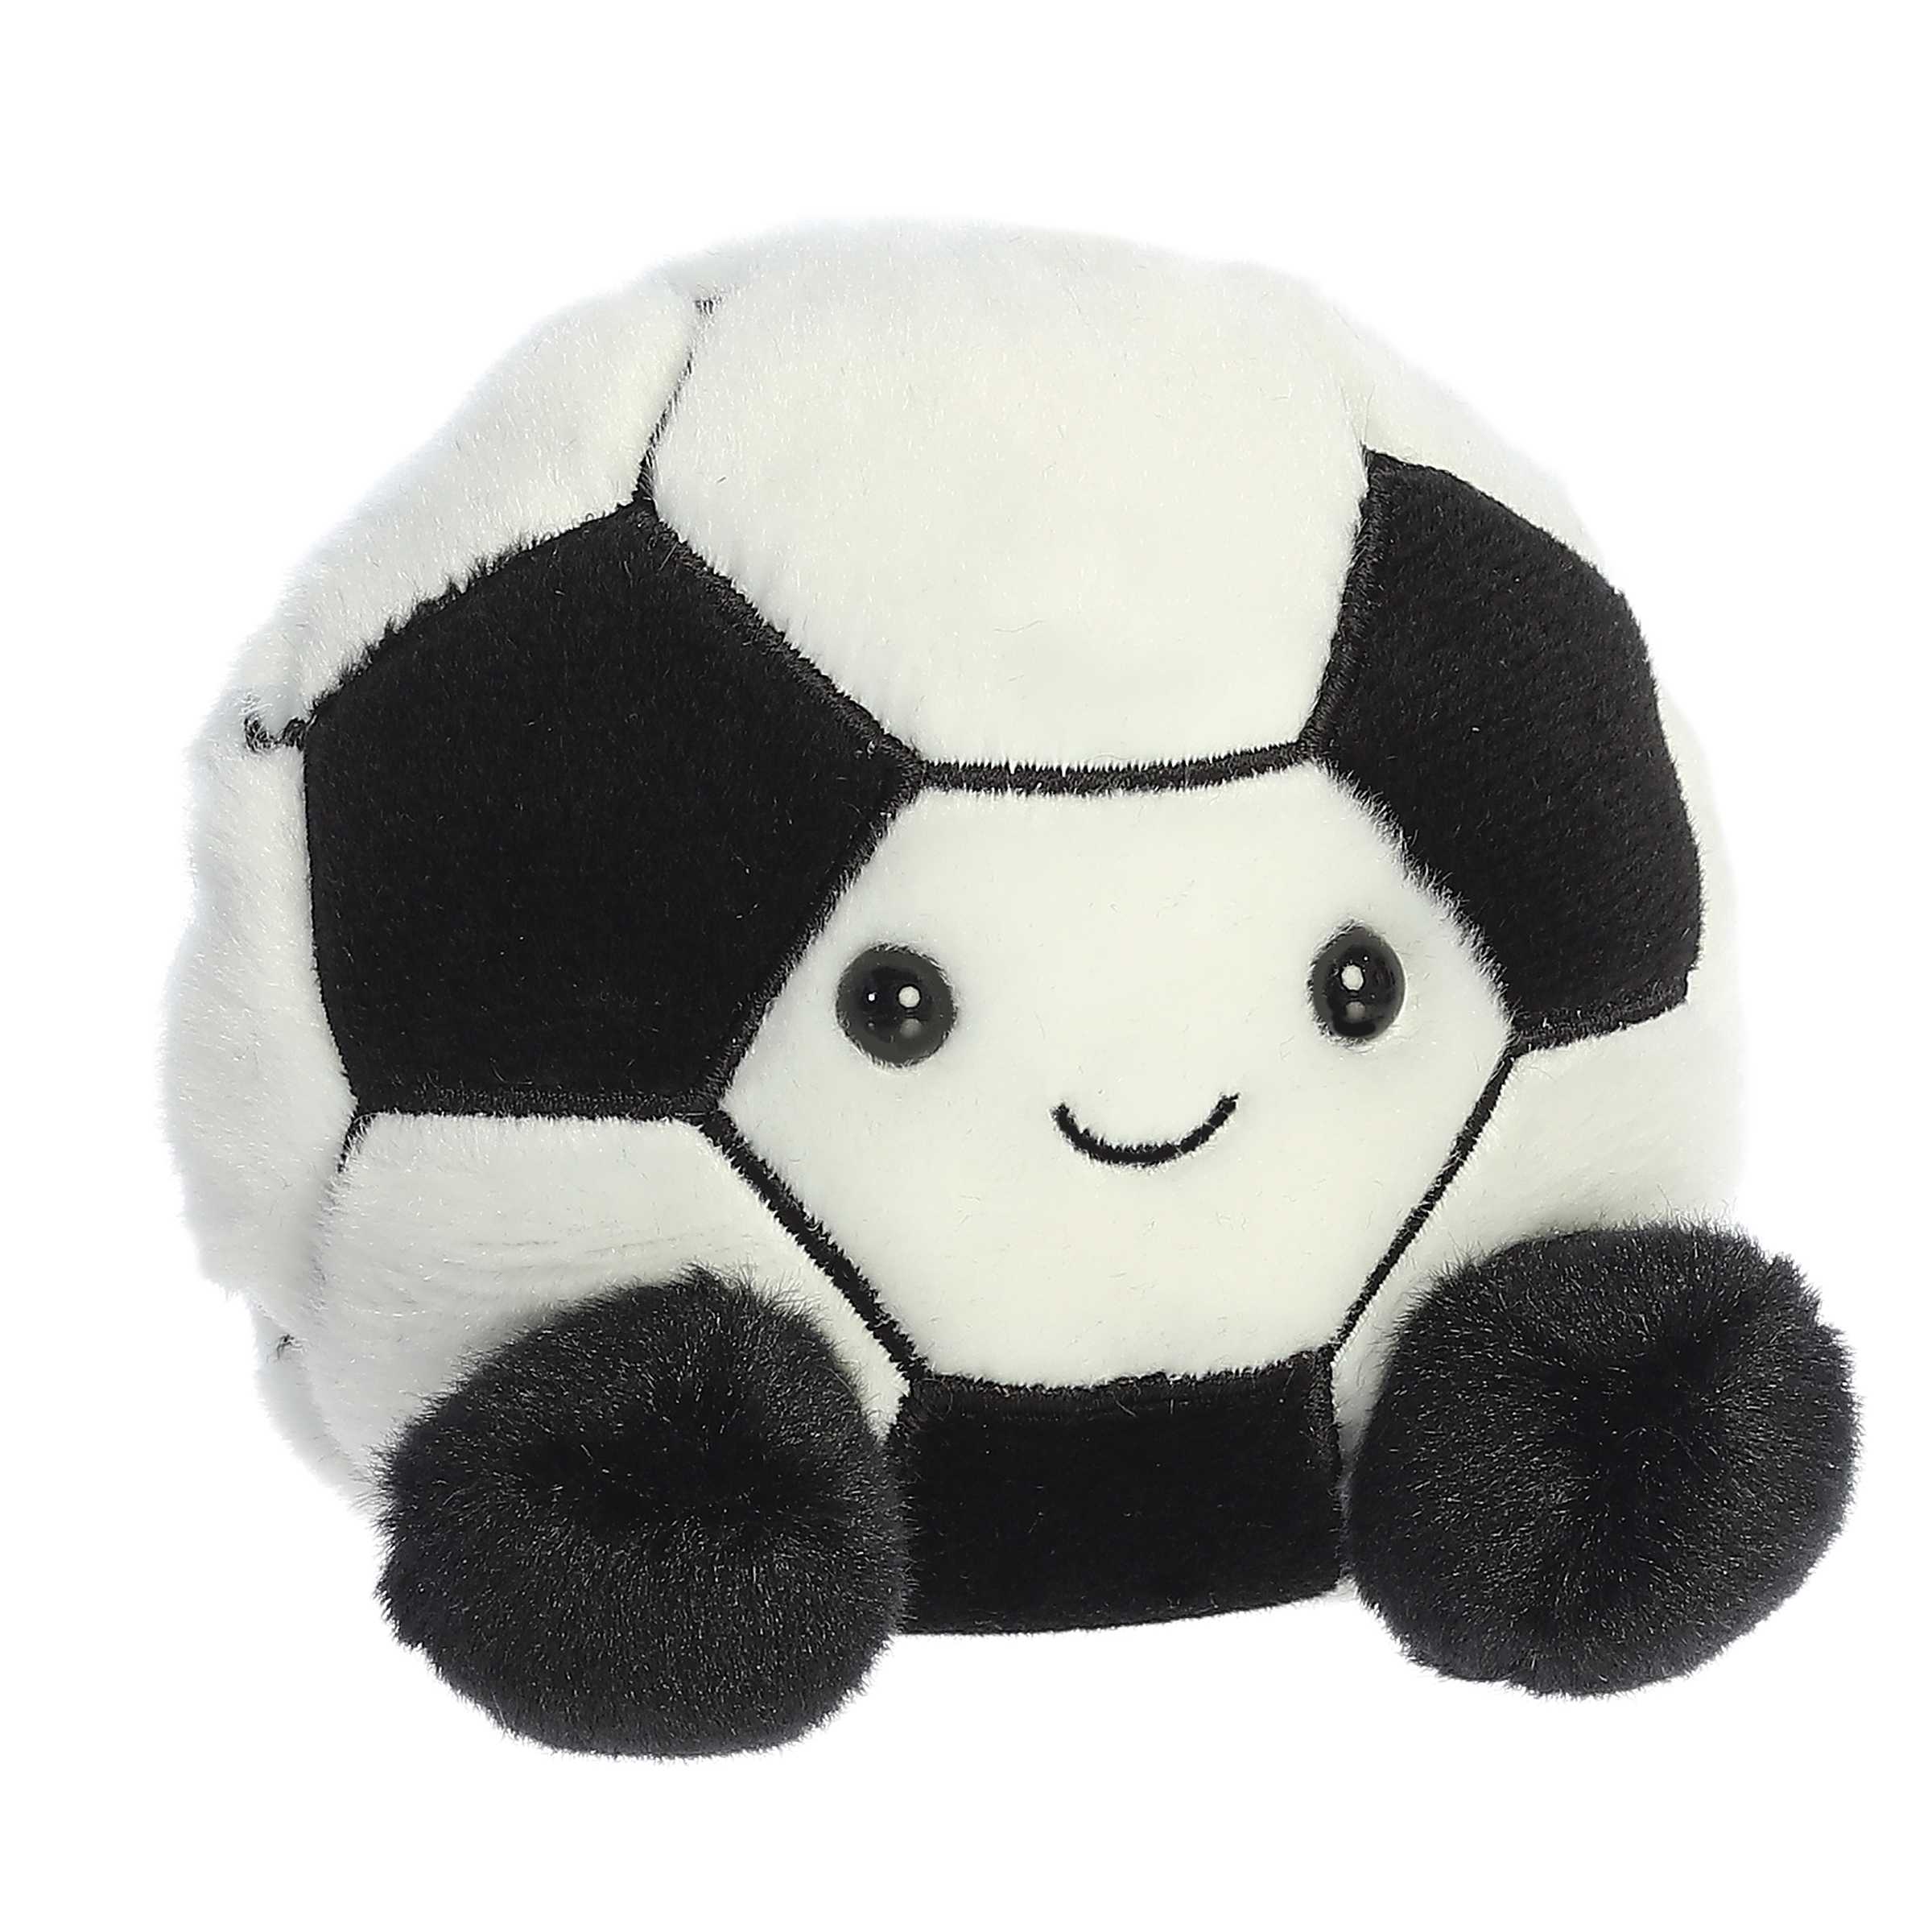 Aurora Plushie Toy. Jelly Cat look-a-like. Each Palm Pal™ Soccer Ball Plushie. Striker Soccer ball. baby & toddler gift Create a collection all of your own and curate the best band of Palm Pals™ that match your style. With the collection always growing, there's a palm pal for everyone. Enjoy free shipping to Canada and the US on orders over $100. For orders below $100, standard shipping rates apply: $6 CAD for Canada and $4.30 USD for the US. Duties included. Affordable toy